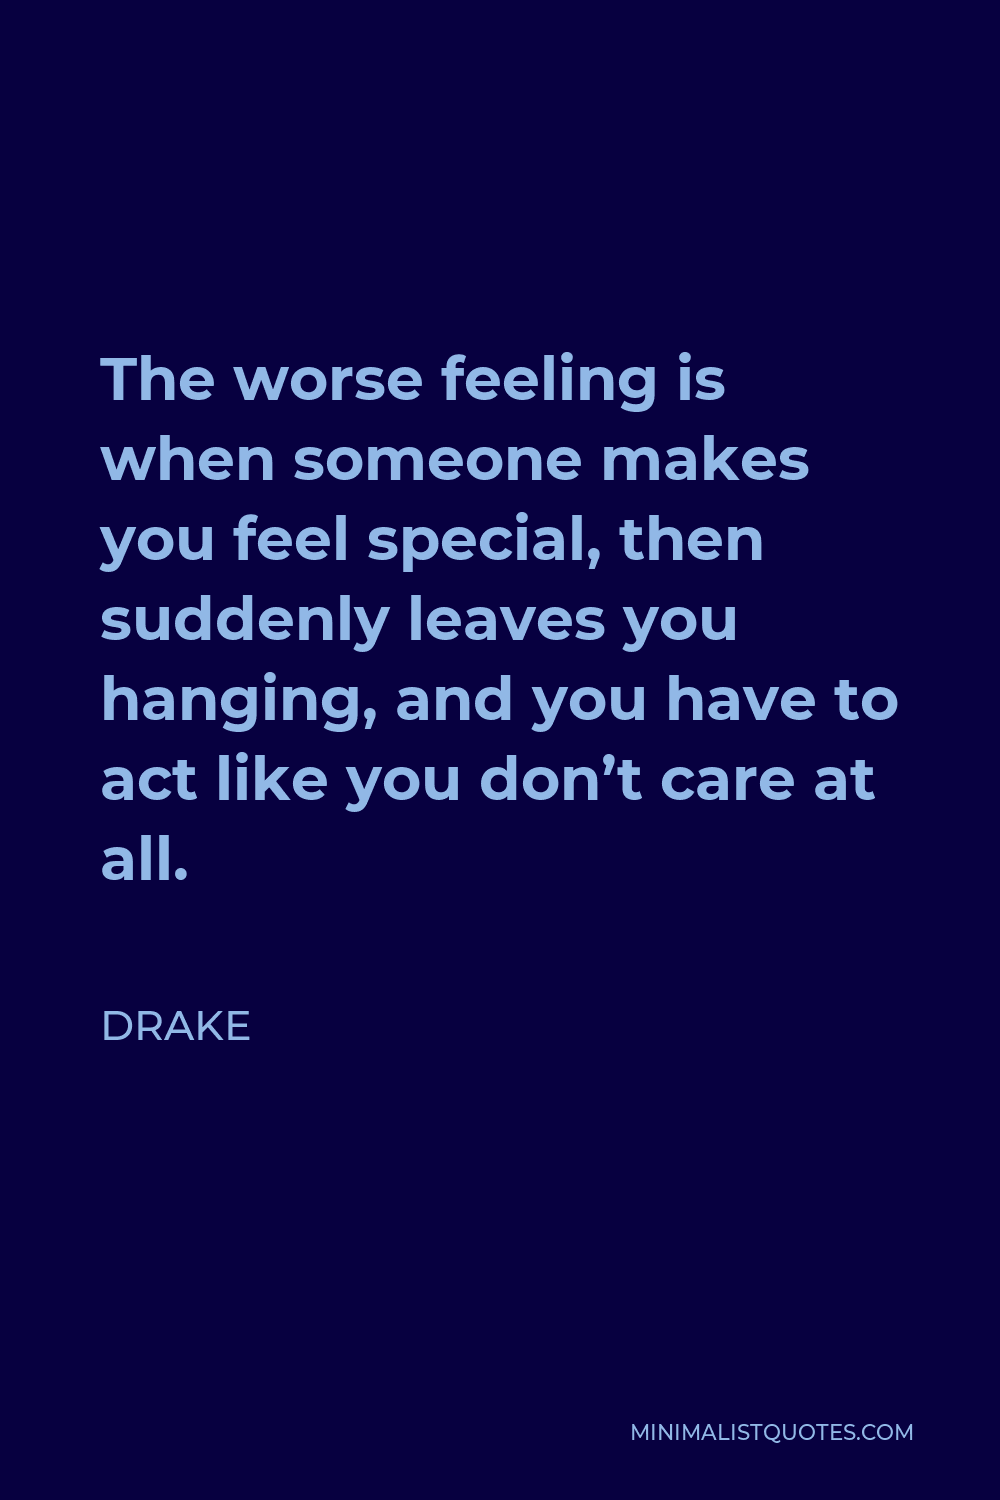 Drake Quote - The worse feeling is when someone makes you feel special, then suddenly leaves you hanging, and you have to act like you don’t care at all.